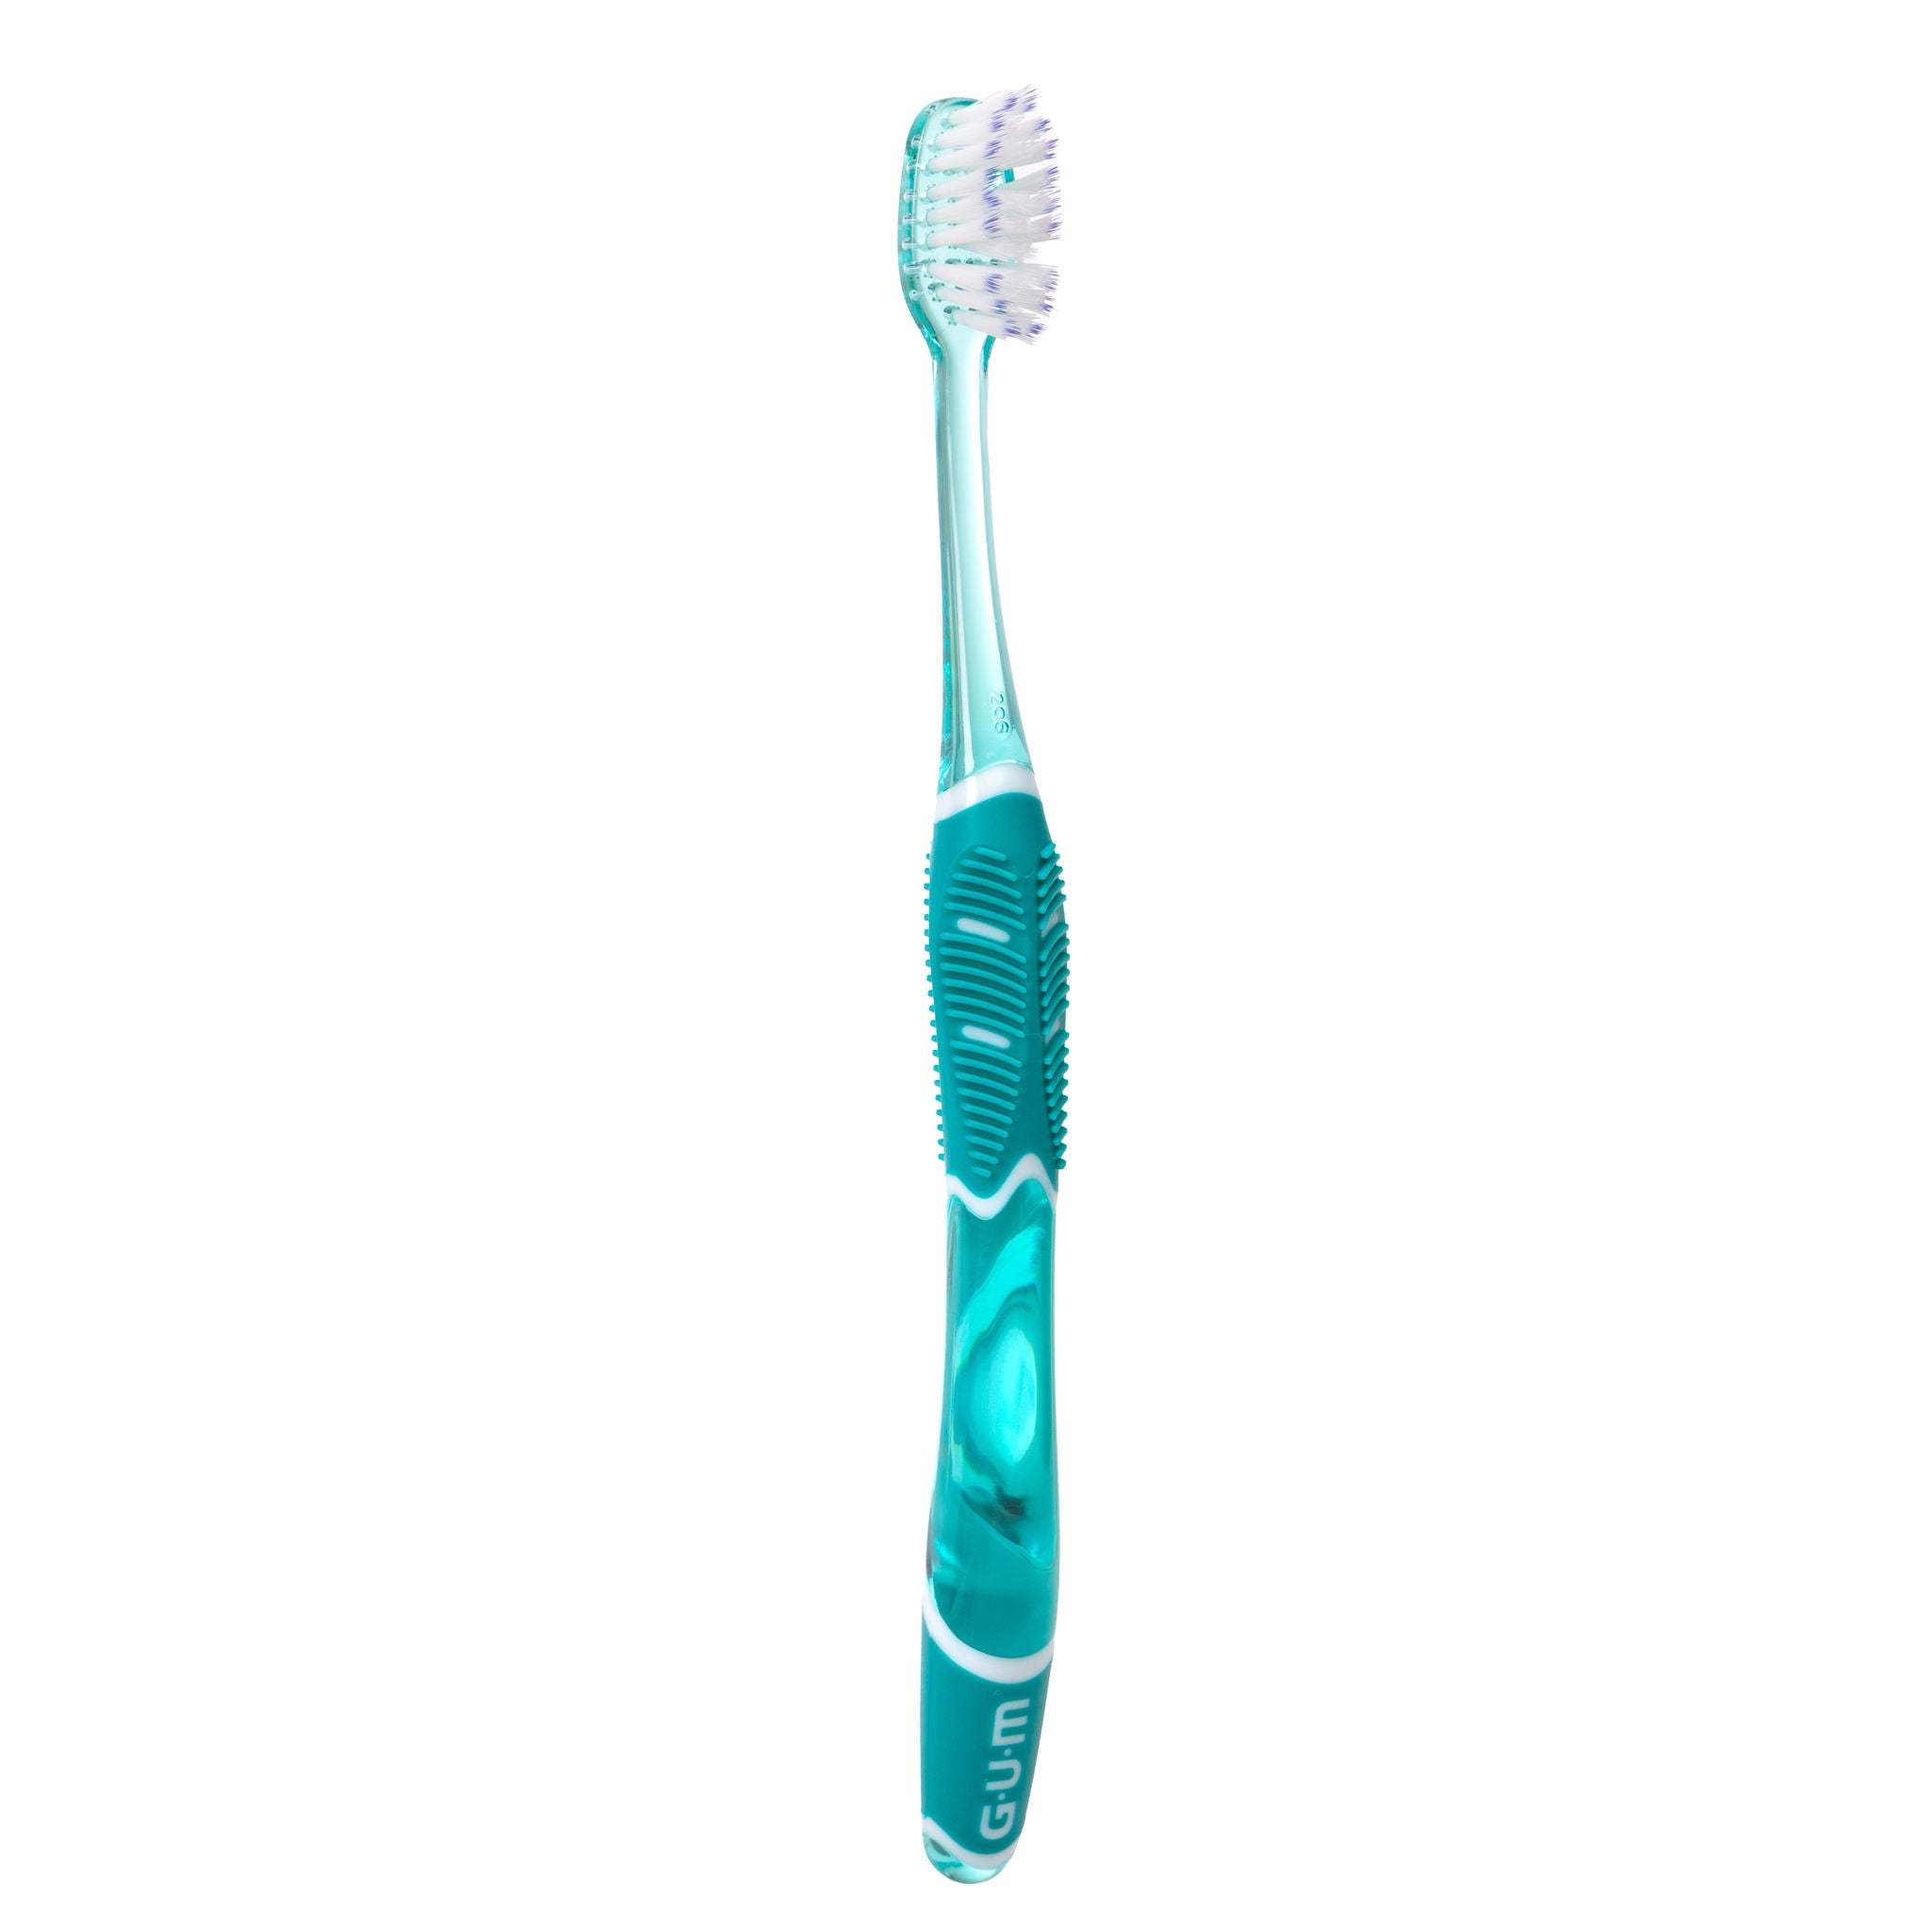 525BTM-GUM-PRO-TOOTHBRUSHES-TURQUOISE-COMPACT-SOFT-N5.jpg